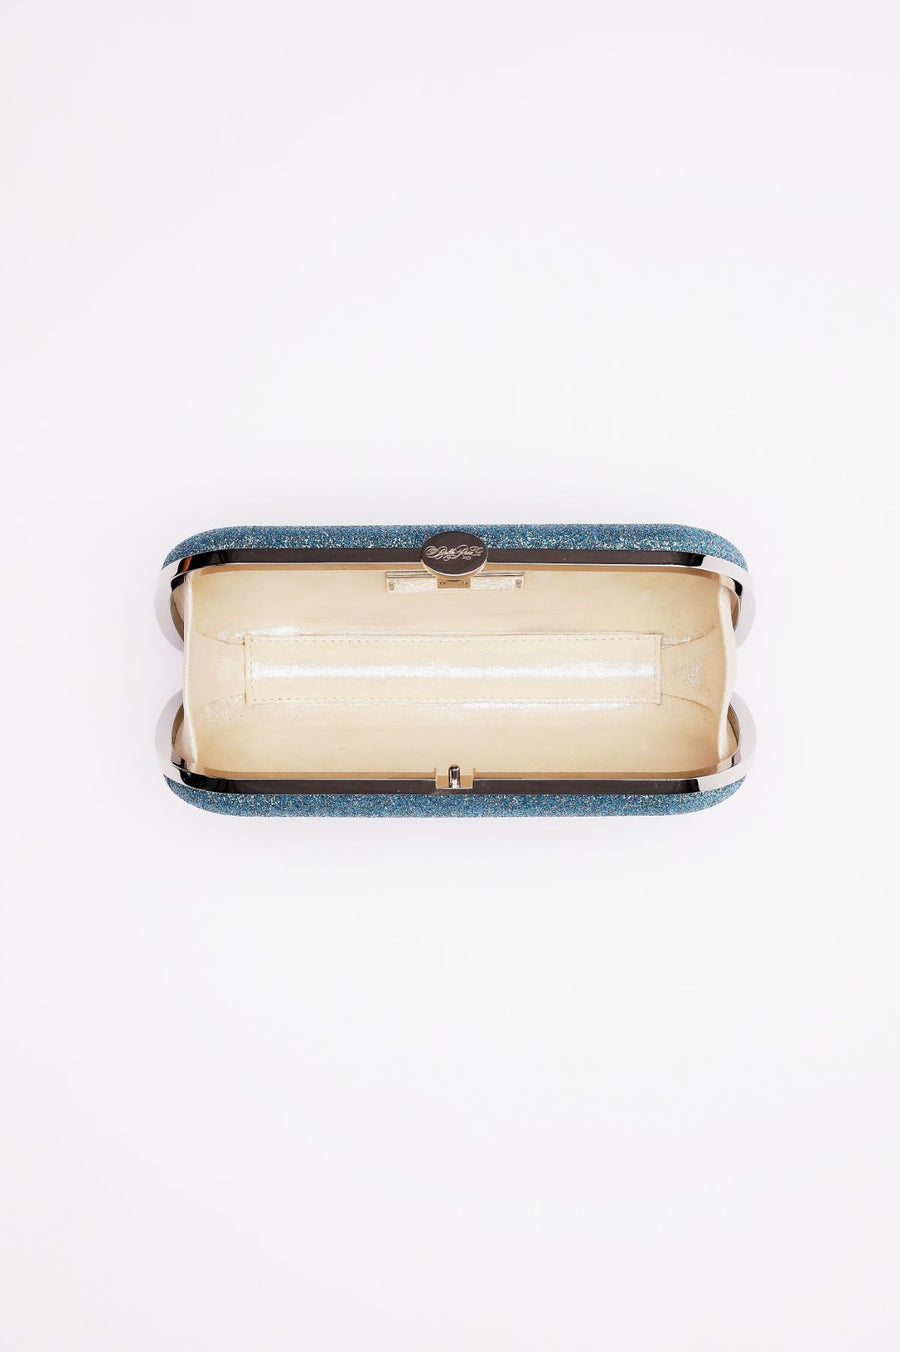 Top open view of Shimmer Bella Clutch in Ocean Blue with silver clasp.